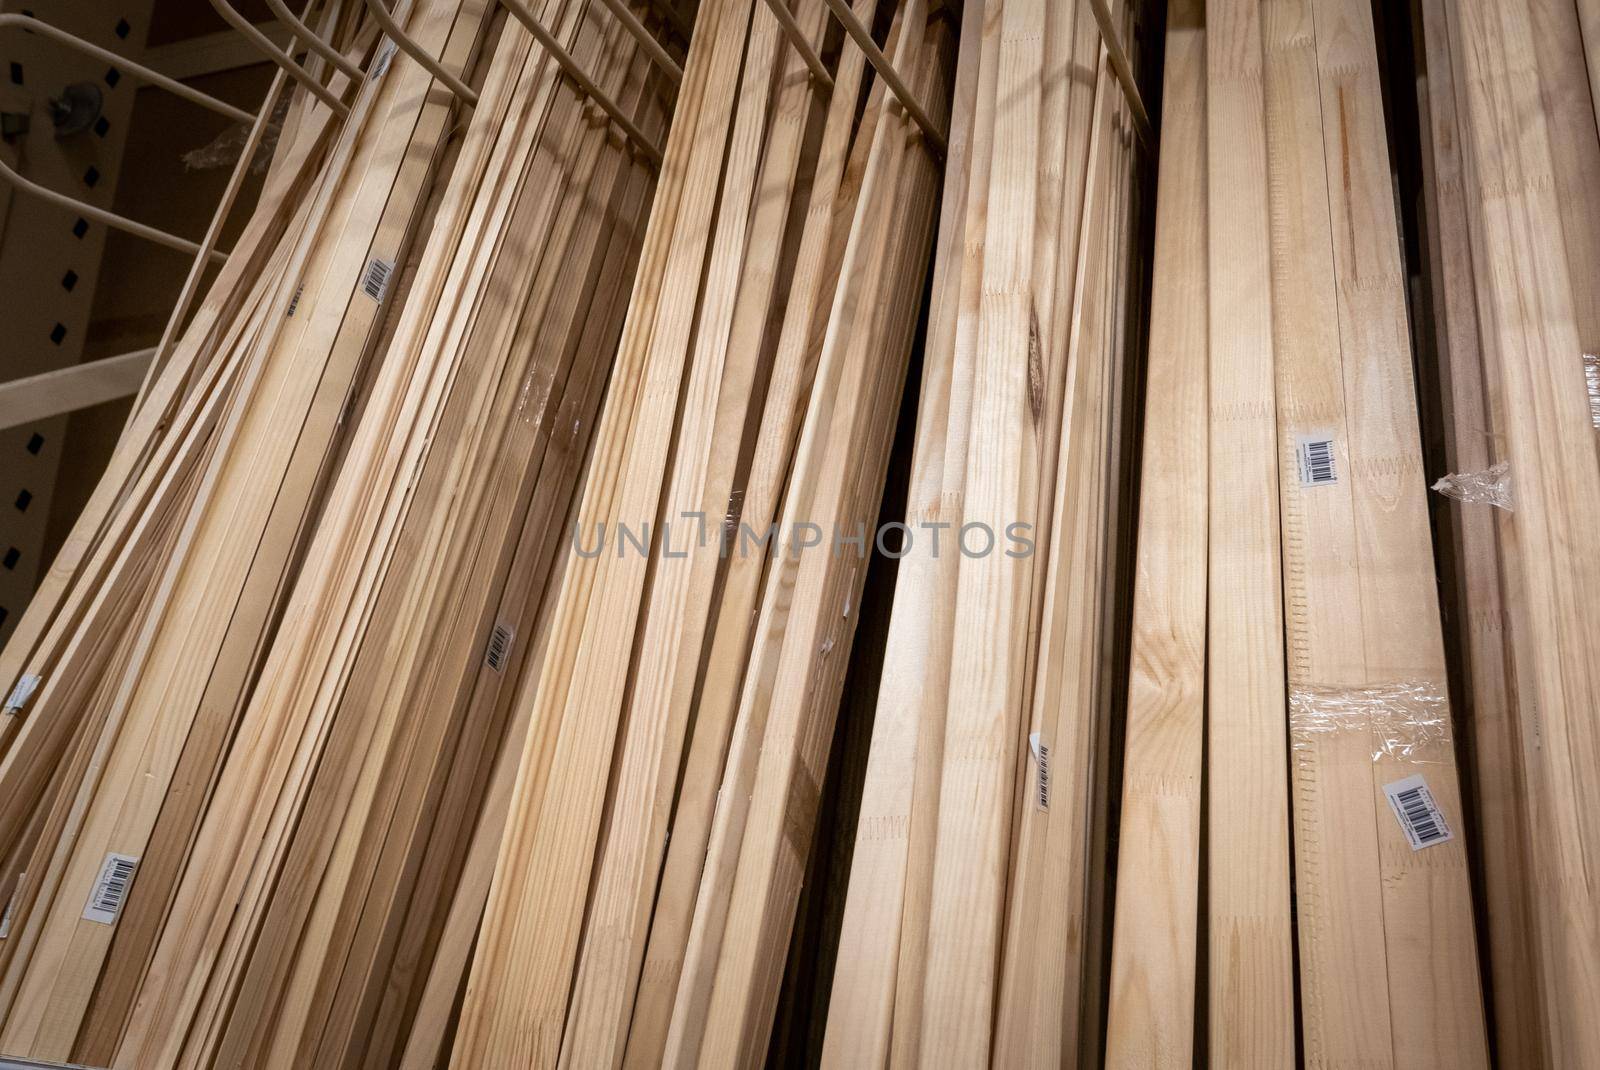 Hip of wooden planks in a construction shop